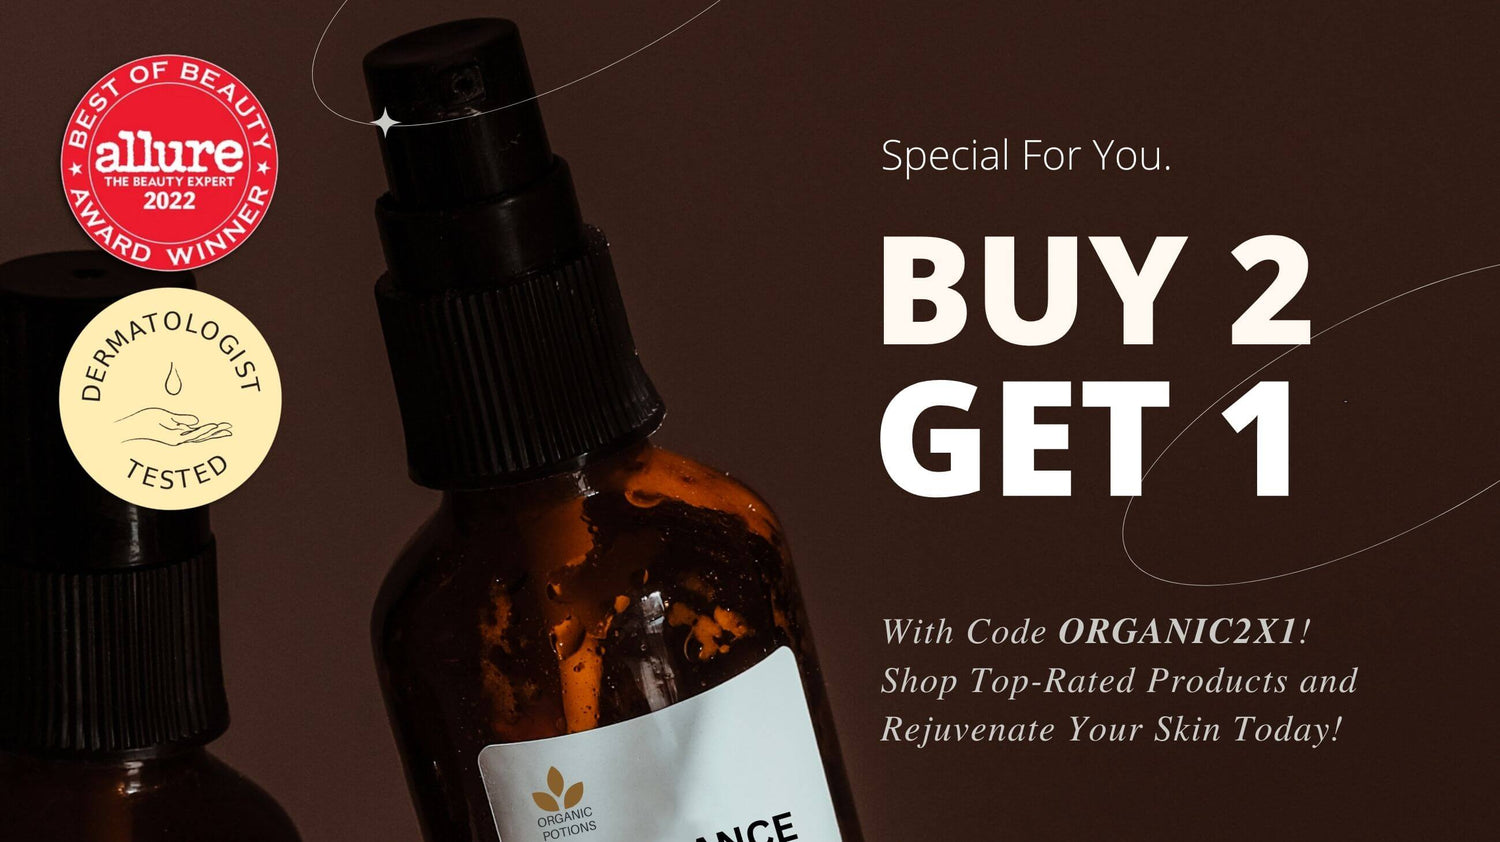 Save big with our limited time promotion: Buy 2 Organic Potions skin care products, Get 1 Free